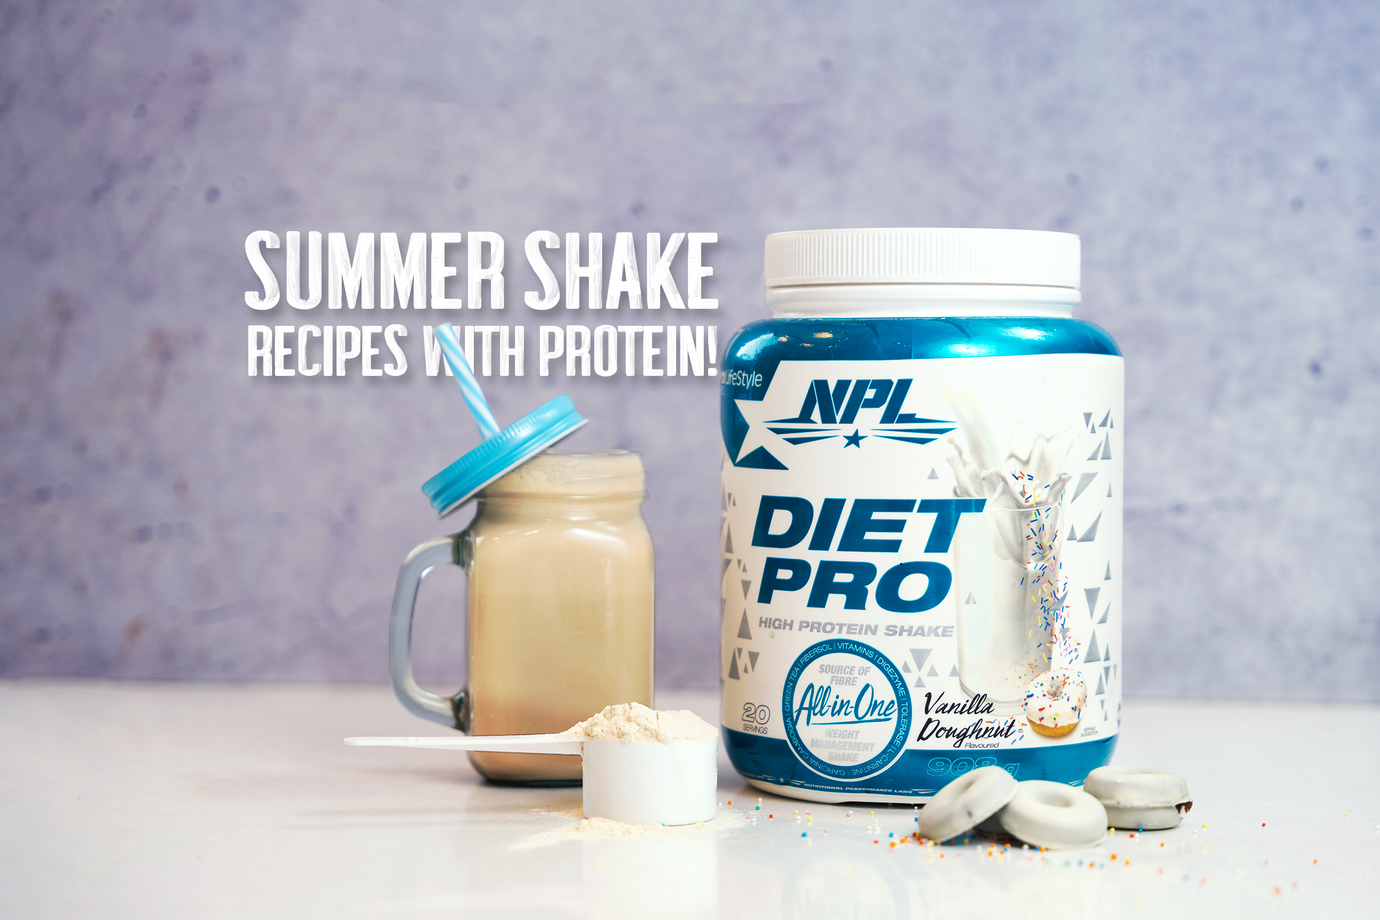 5 Shake ideas for Summer – with Protein!